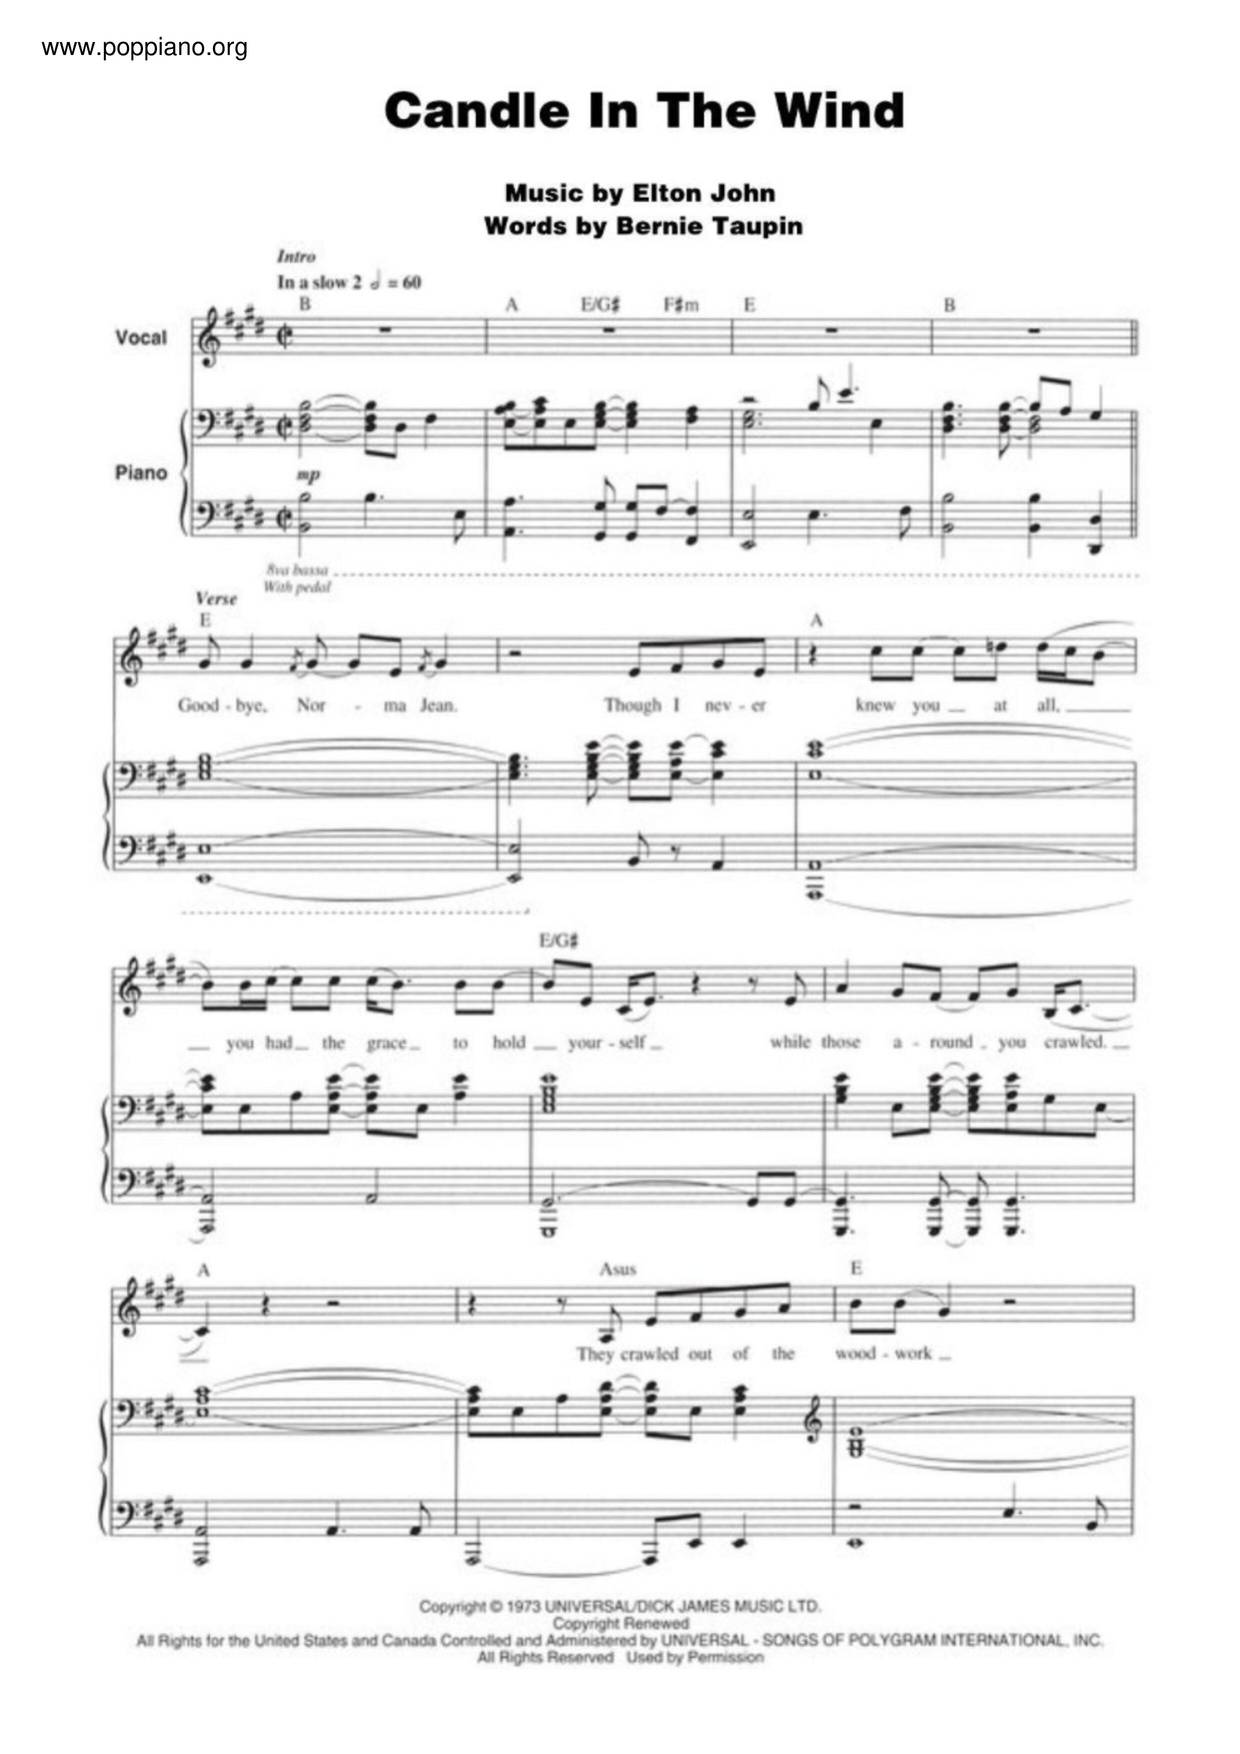 Candle In The Wind Score